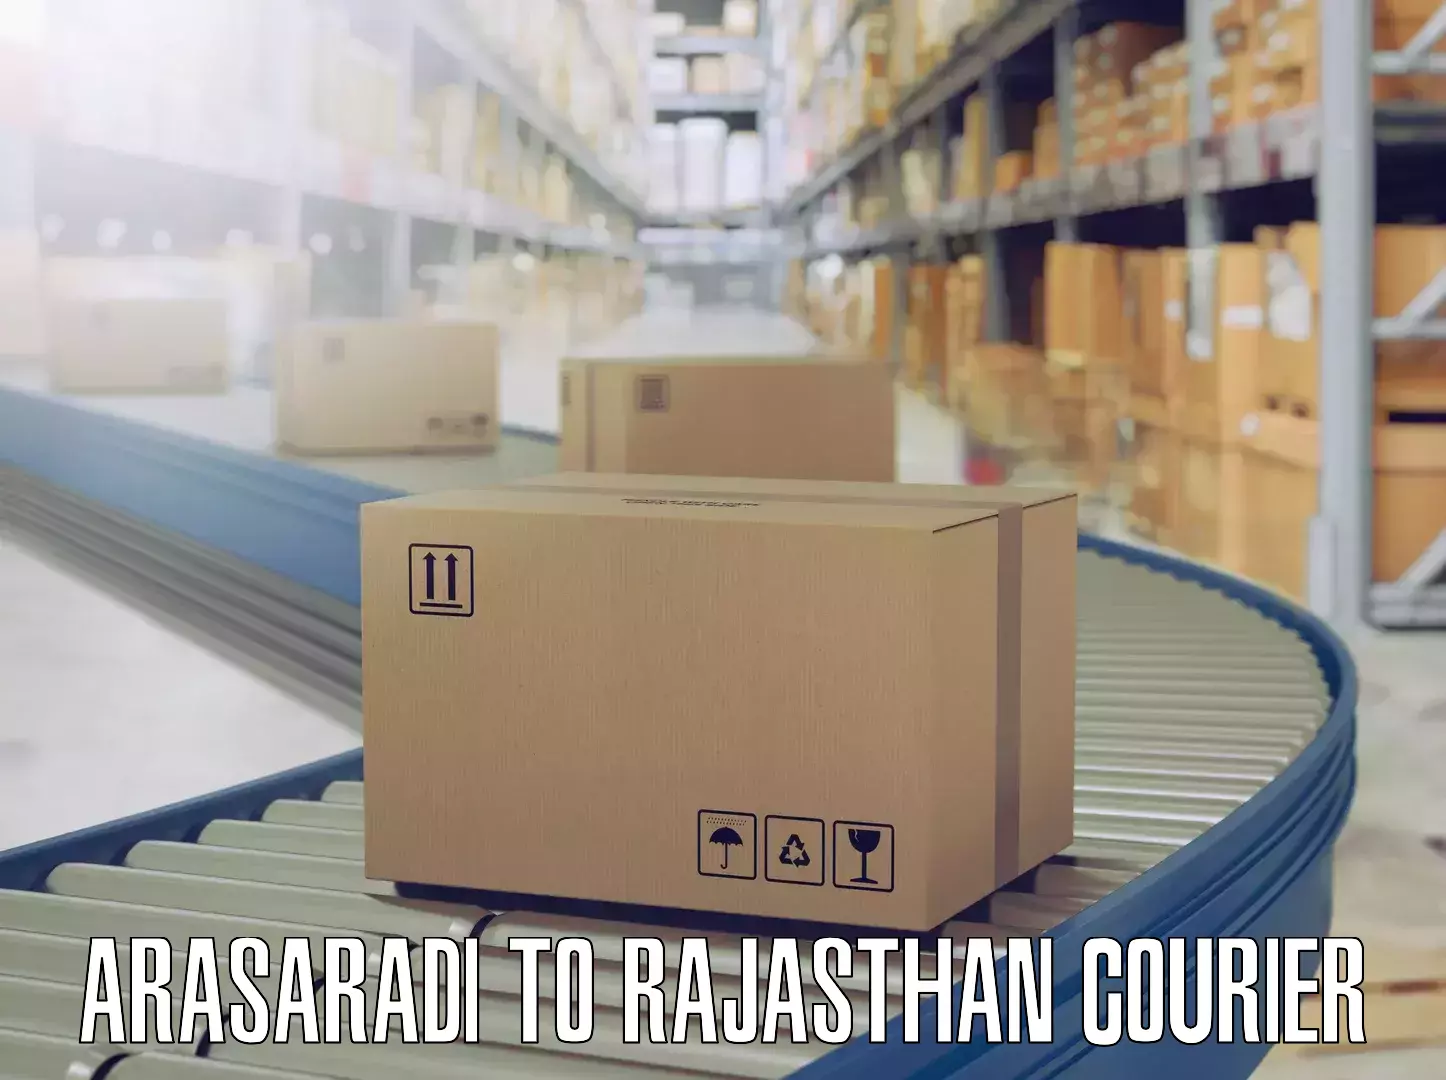 Efficient relocation services Arasaradi to Bayana